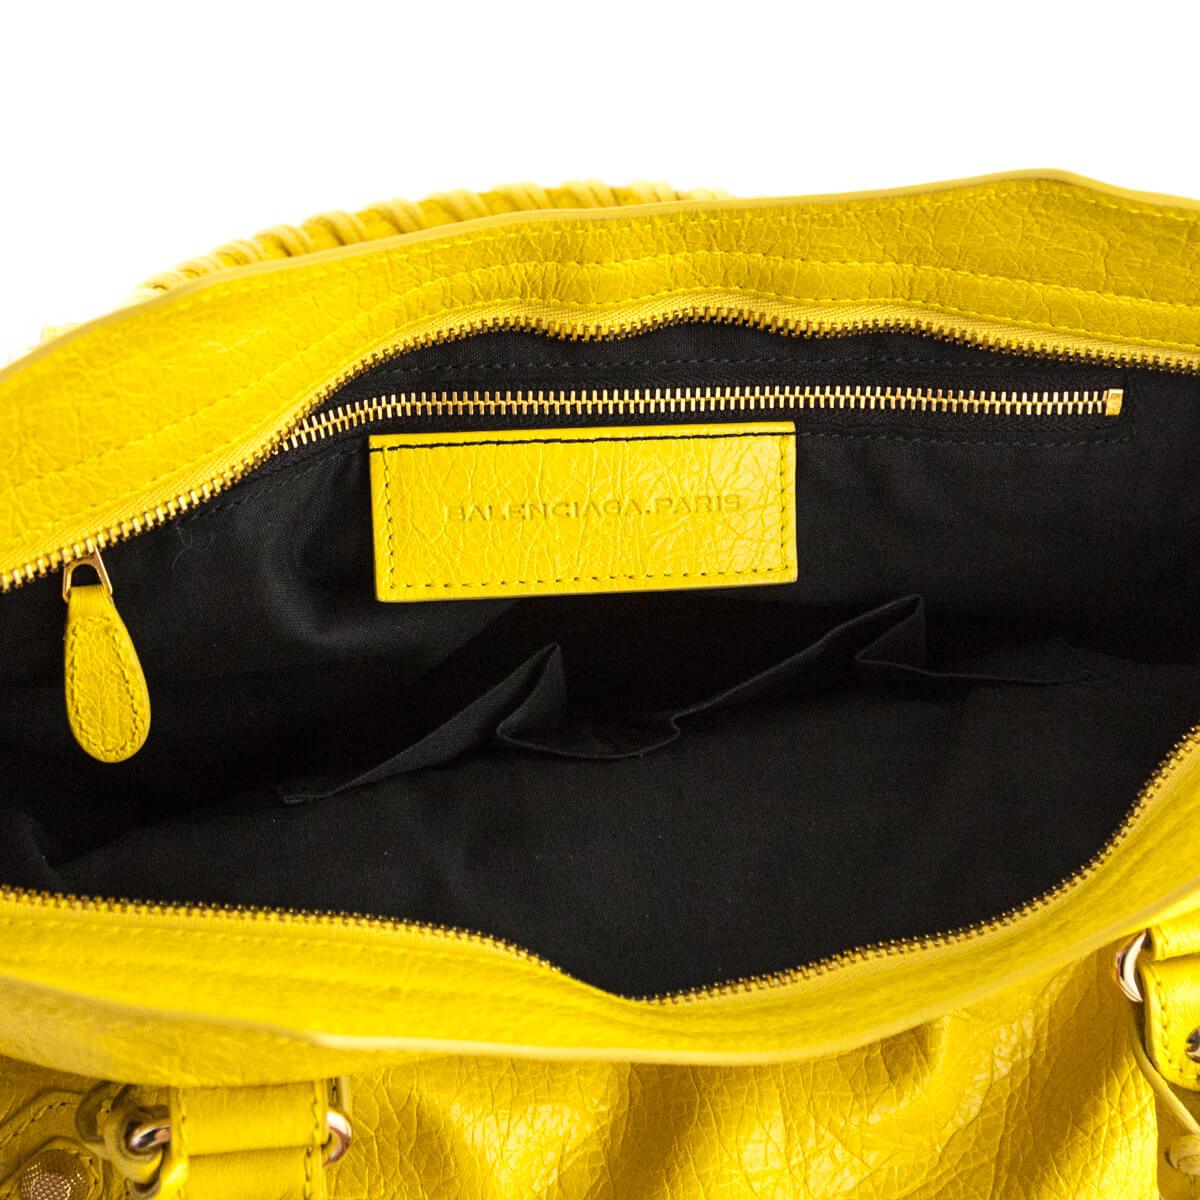 Balenciaga Curry Lambskin Giant 12 Gold City Bag - Love that Bag etc - Preowned Authentic Designer Handbags & Preloved Fashions